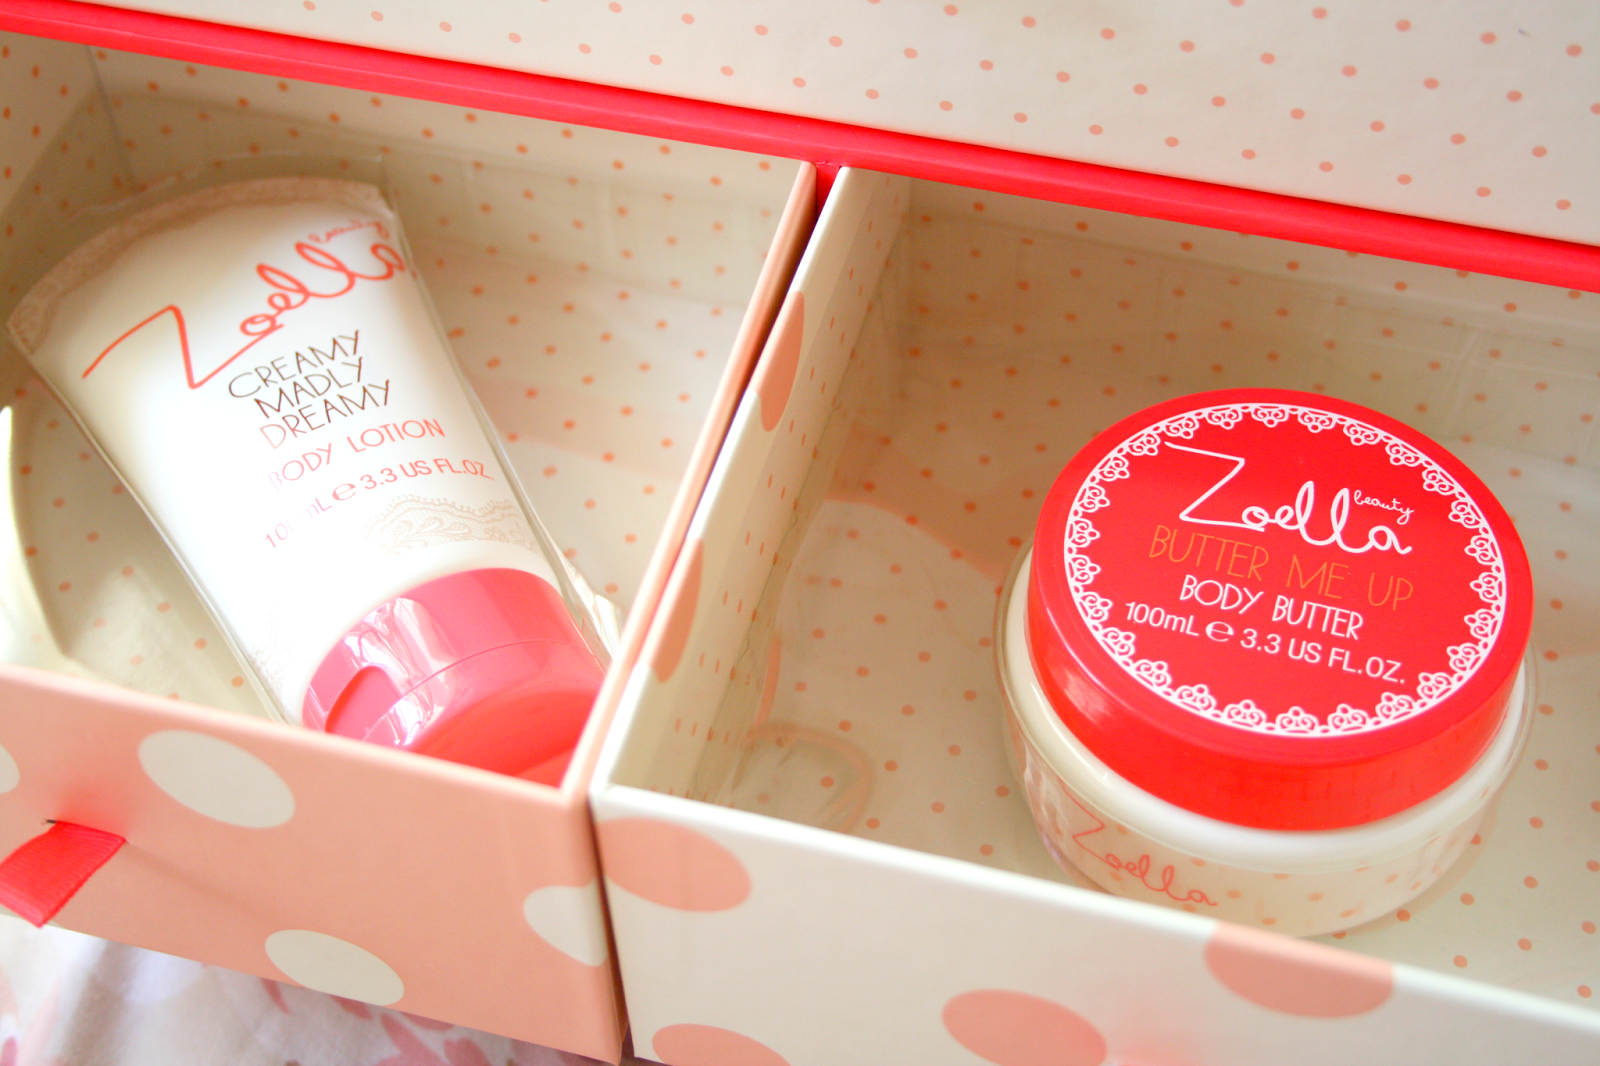 Zoella Beauty Awesome Drawersome Bathing Collection